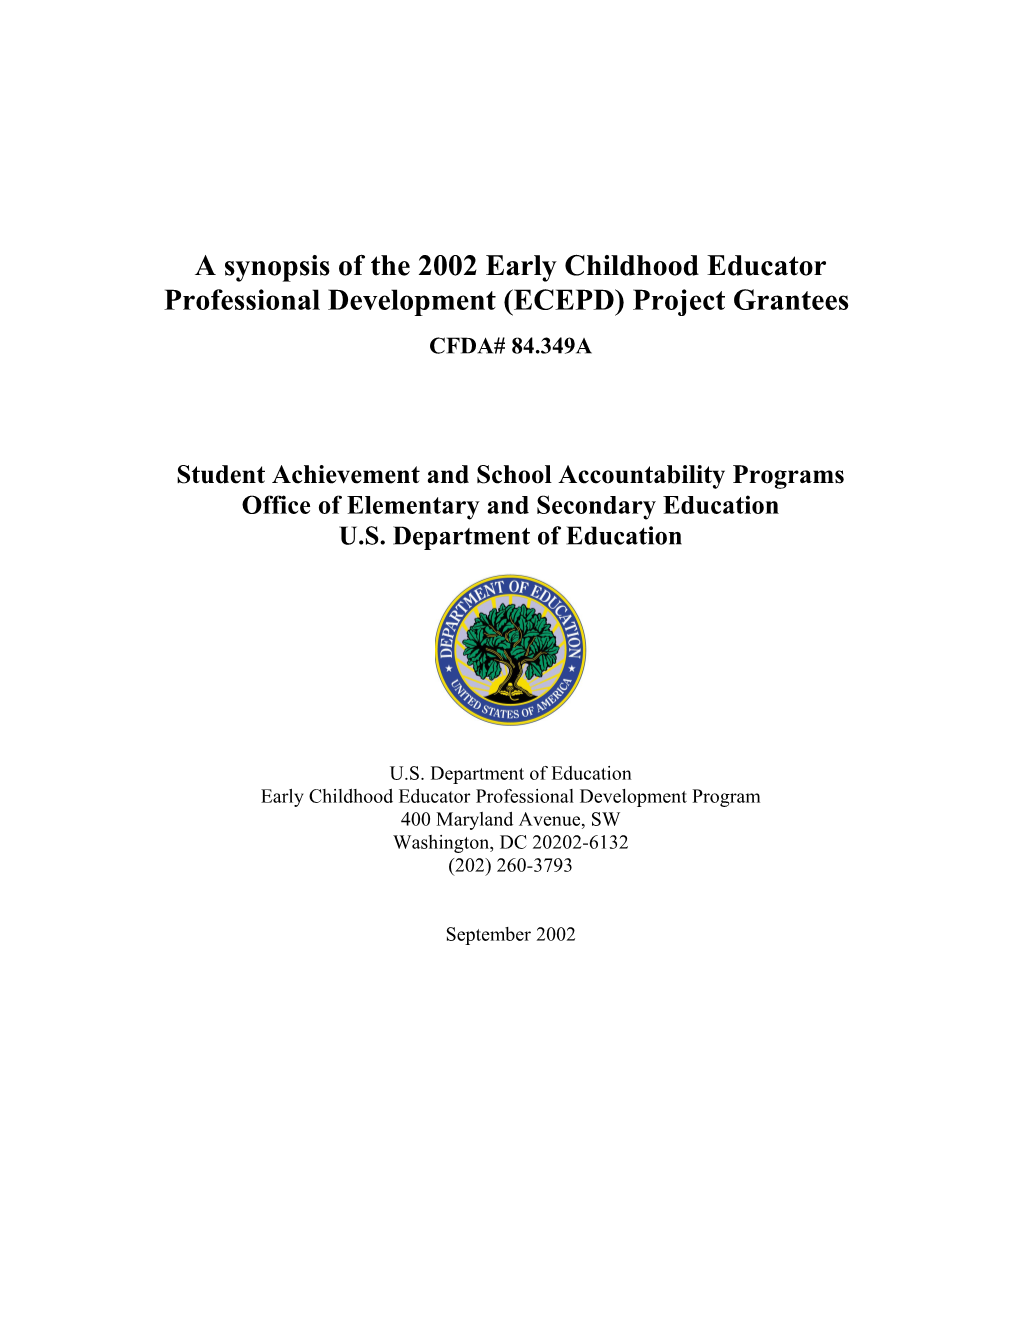 2002 Early Childhood Educator Professional Development (ECEPD) Project Grantees (MS WORD)